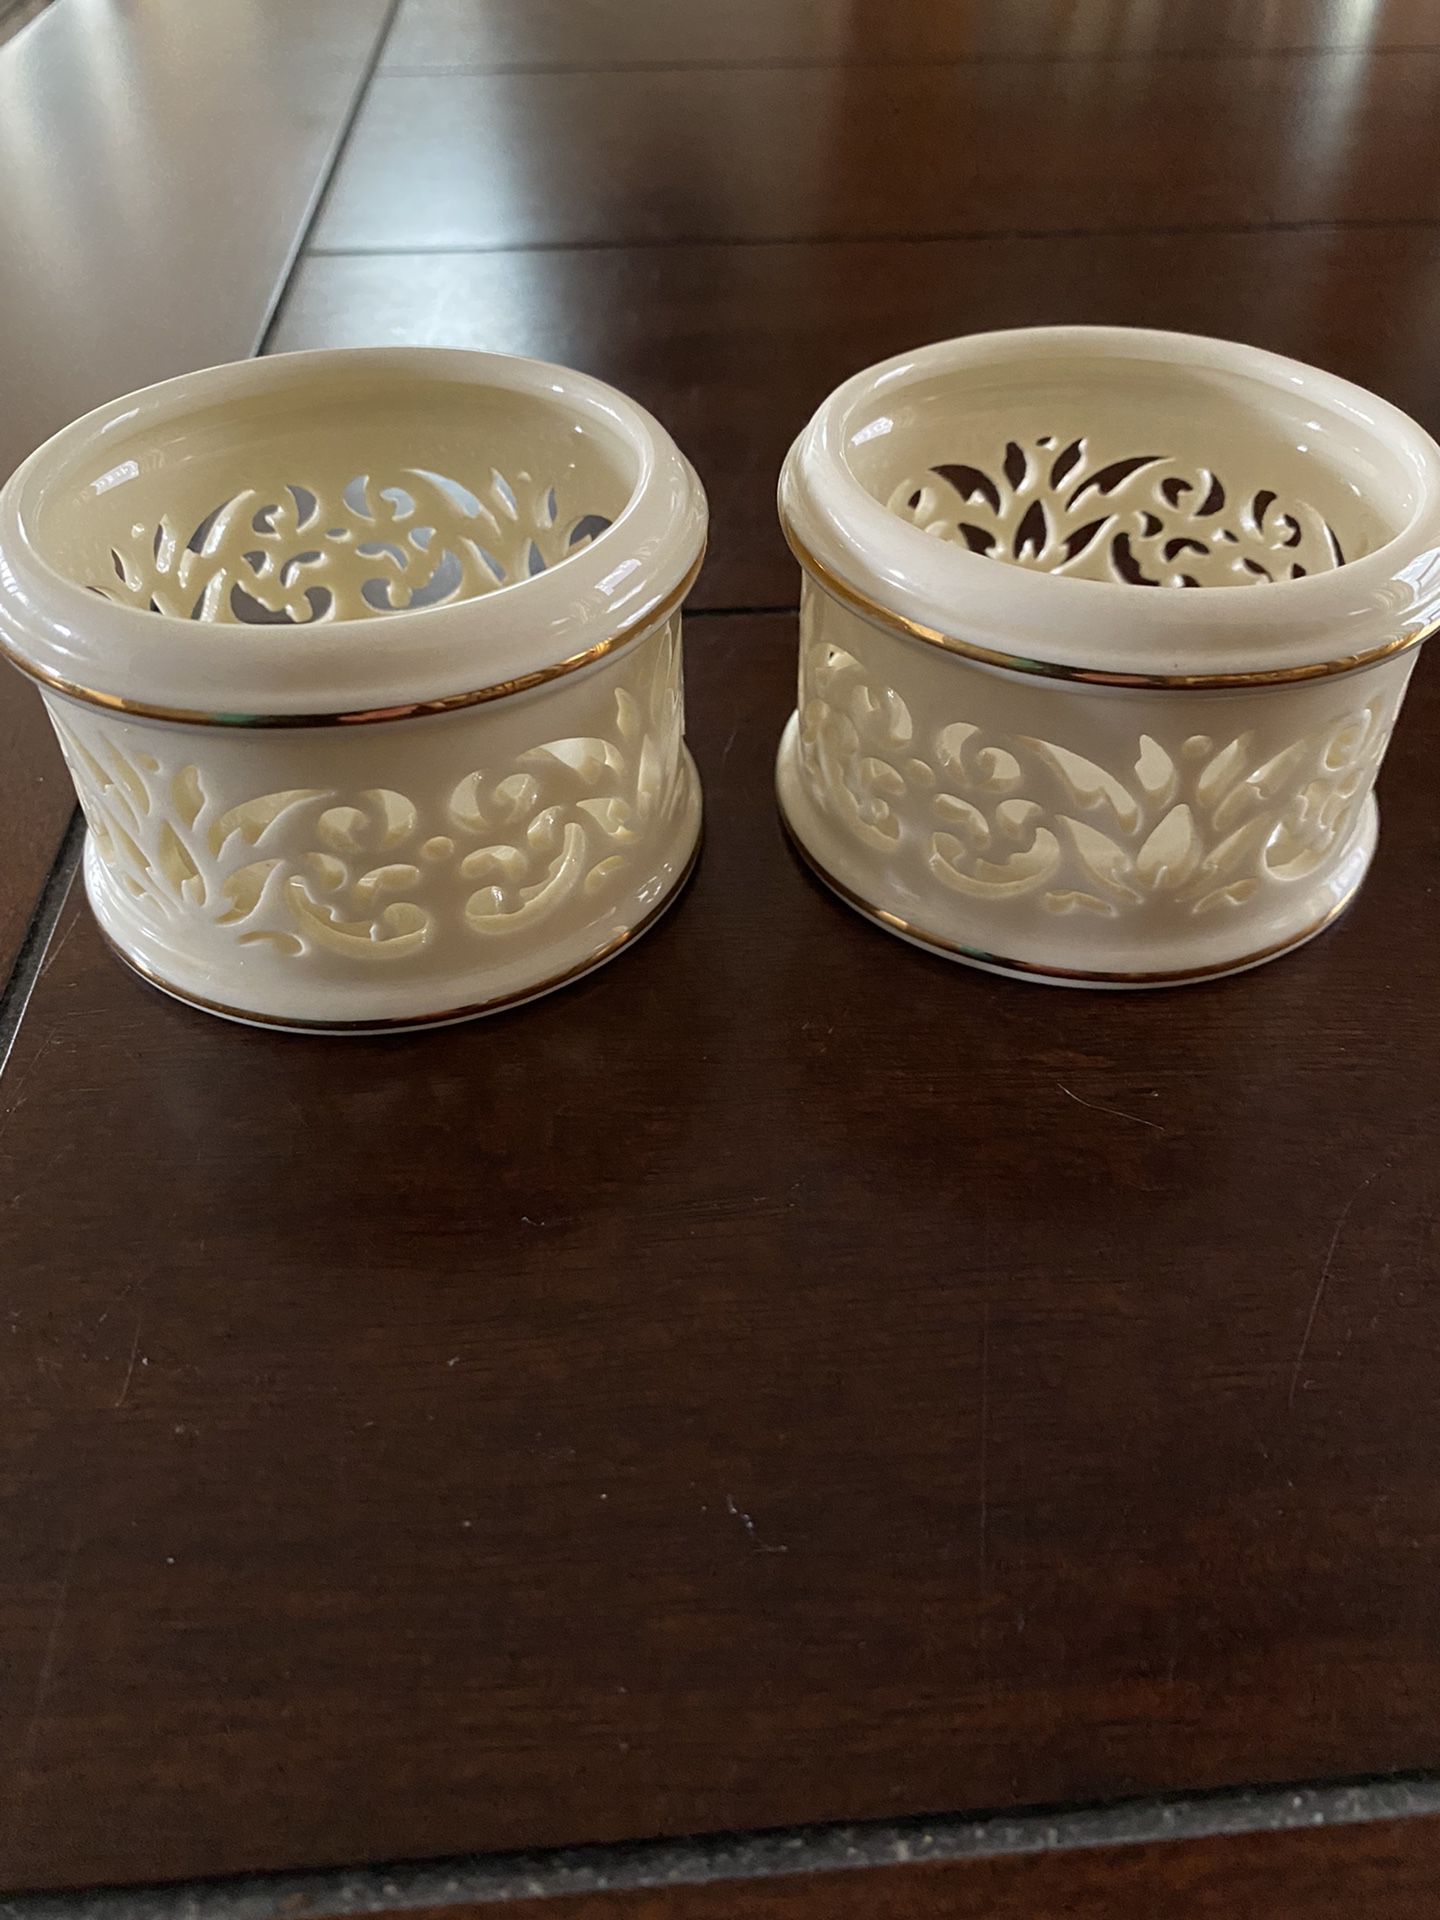 Lenox Tealight Holders, 2 1/2” Wide by 1 1/2” Tall. 